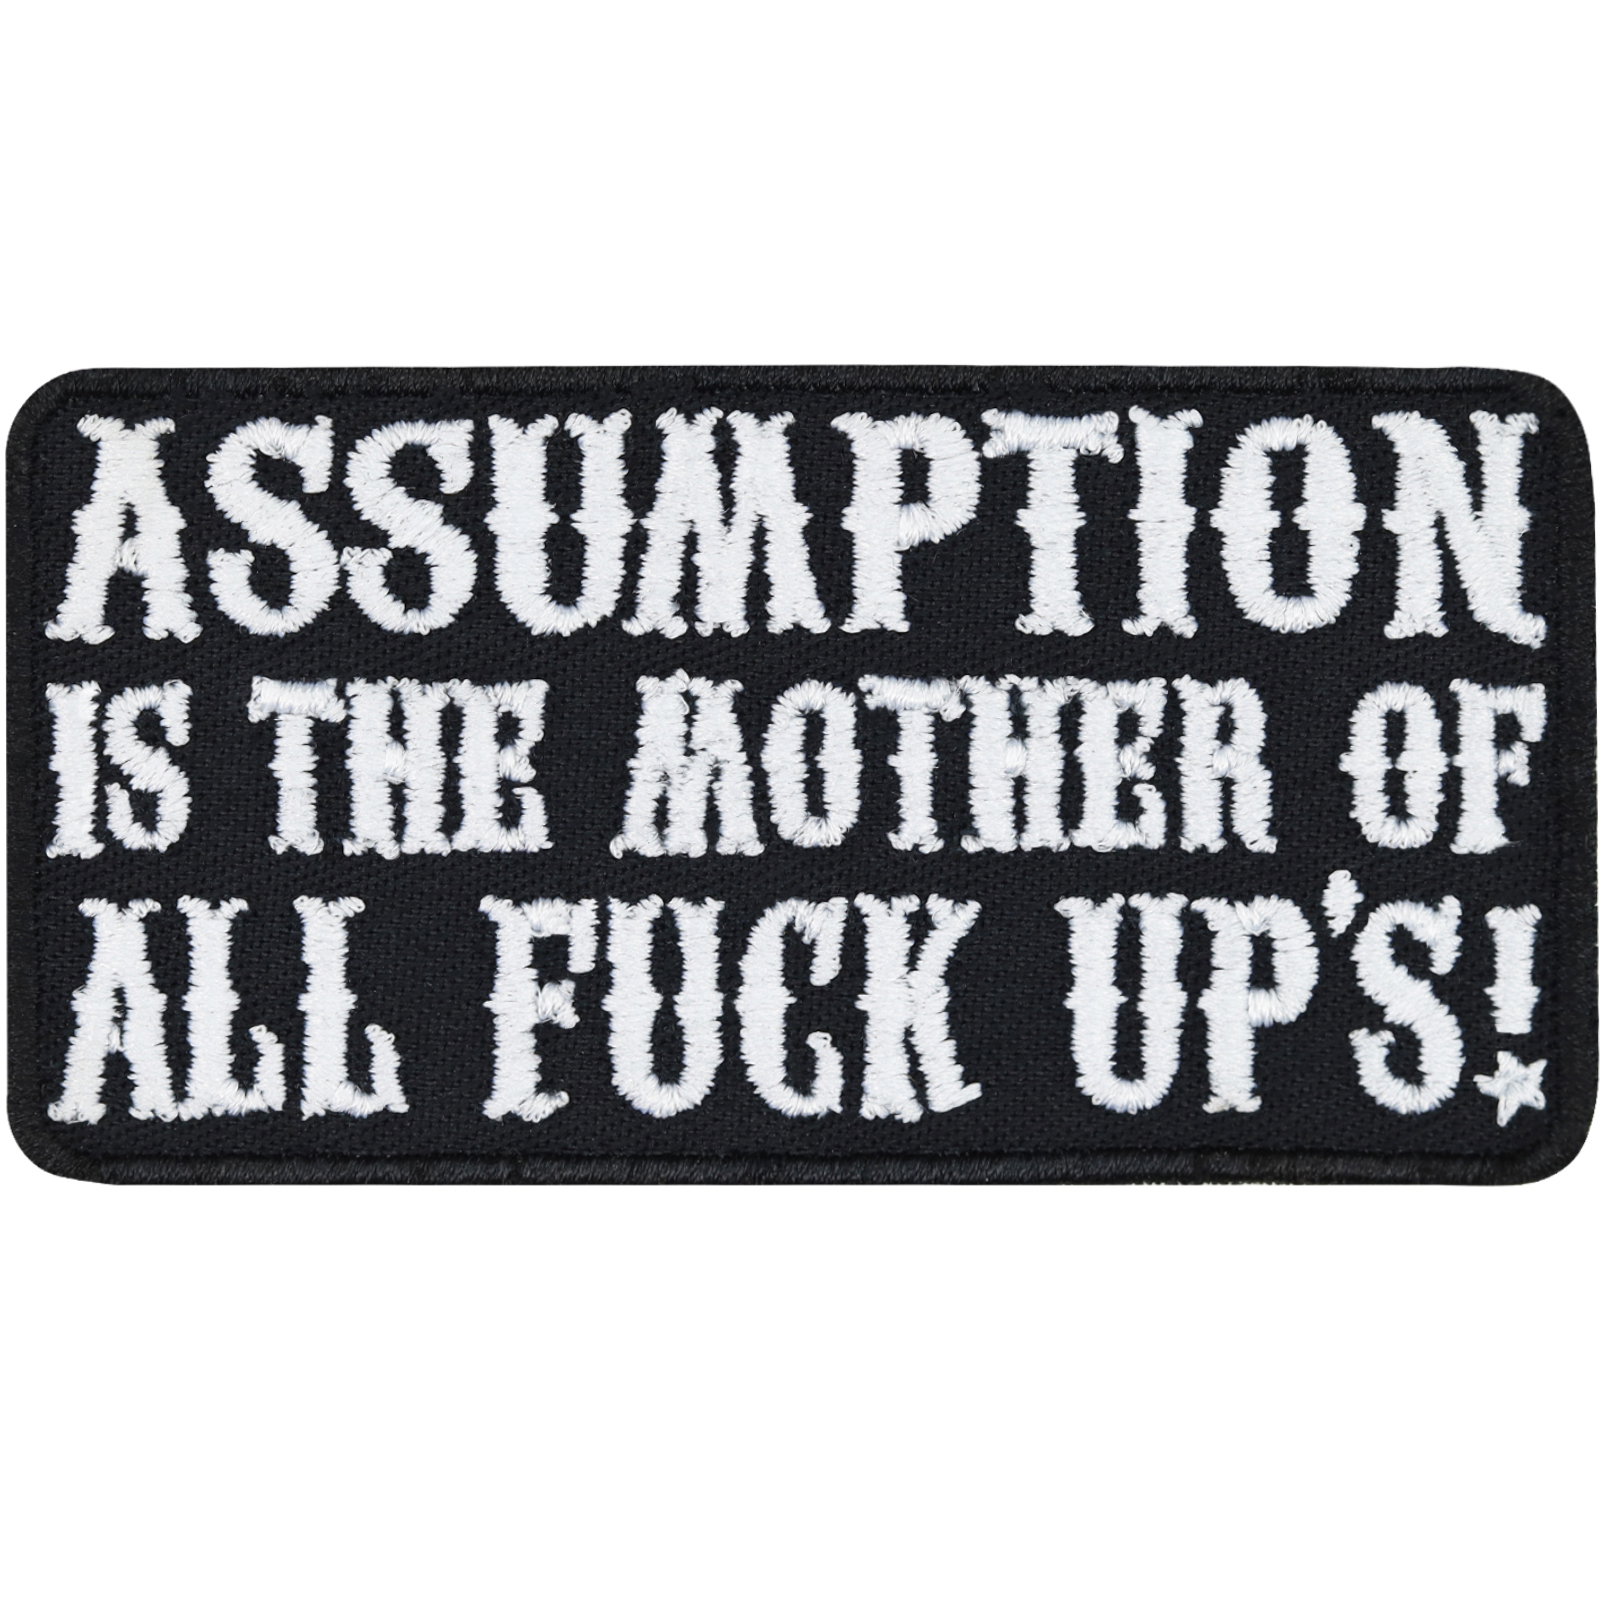 Assumption is the mother of all fuck up's! - Patch